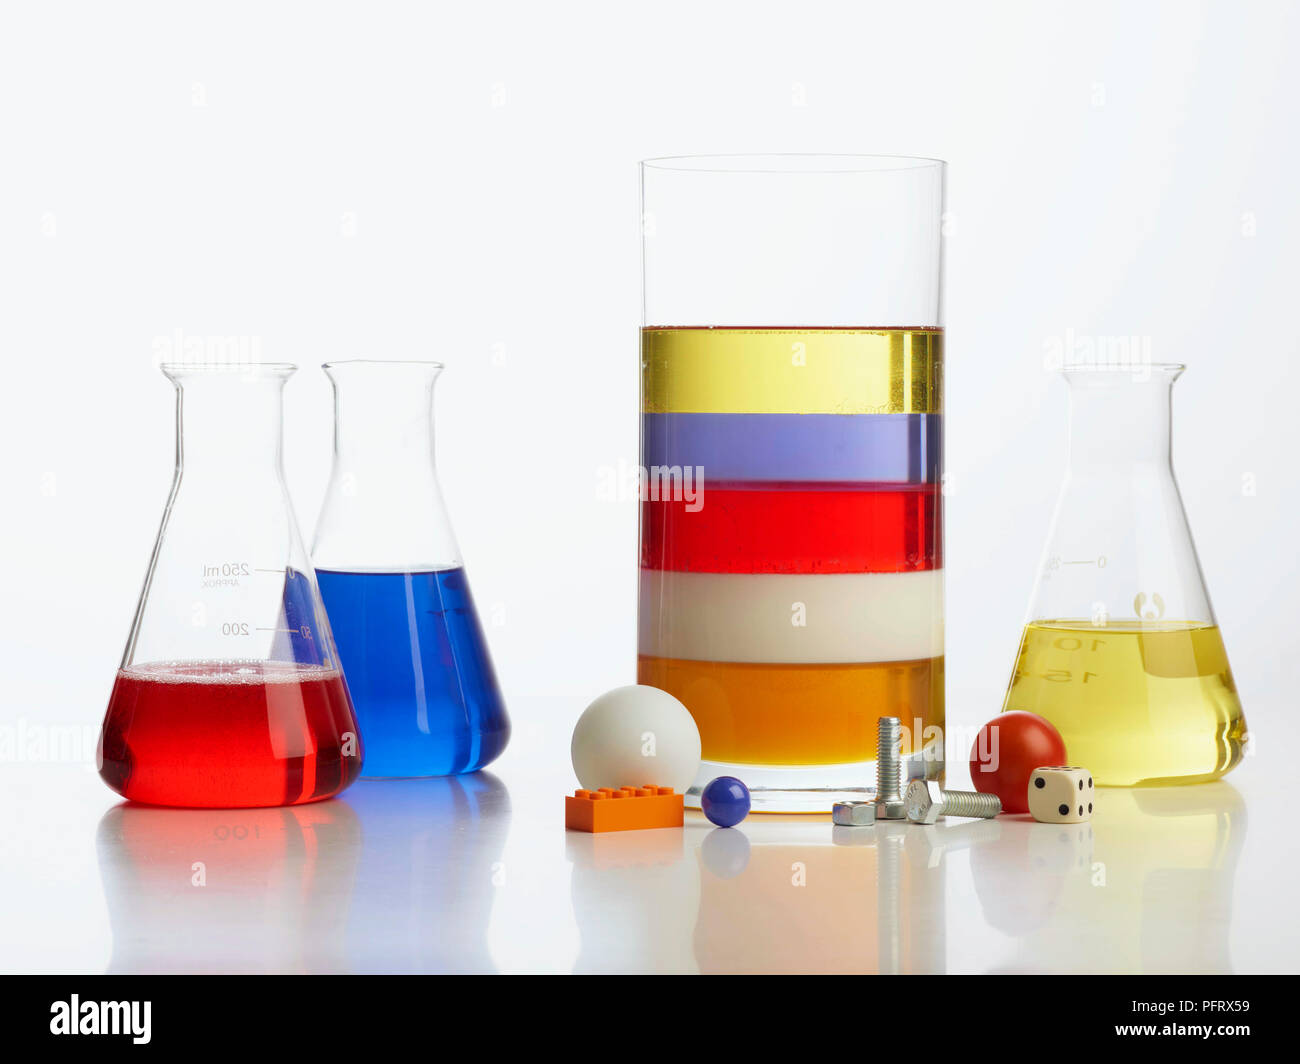 Density tower experiment, clear vase with 5 layers of liquid - honey, milk, detergent, water (with blue food colouring), and vegetable oil, surrounded by table tennis ball, screws marble, lego block, dice, and cherry tomato. Three extra glass container included, containing detergent, blue water, and vegetable oil Stock Photo